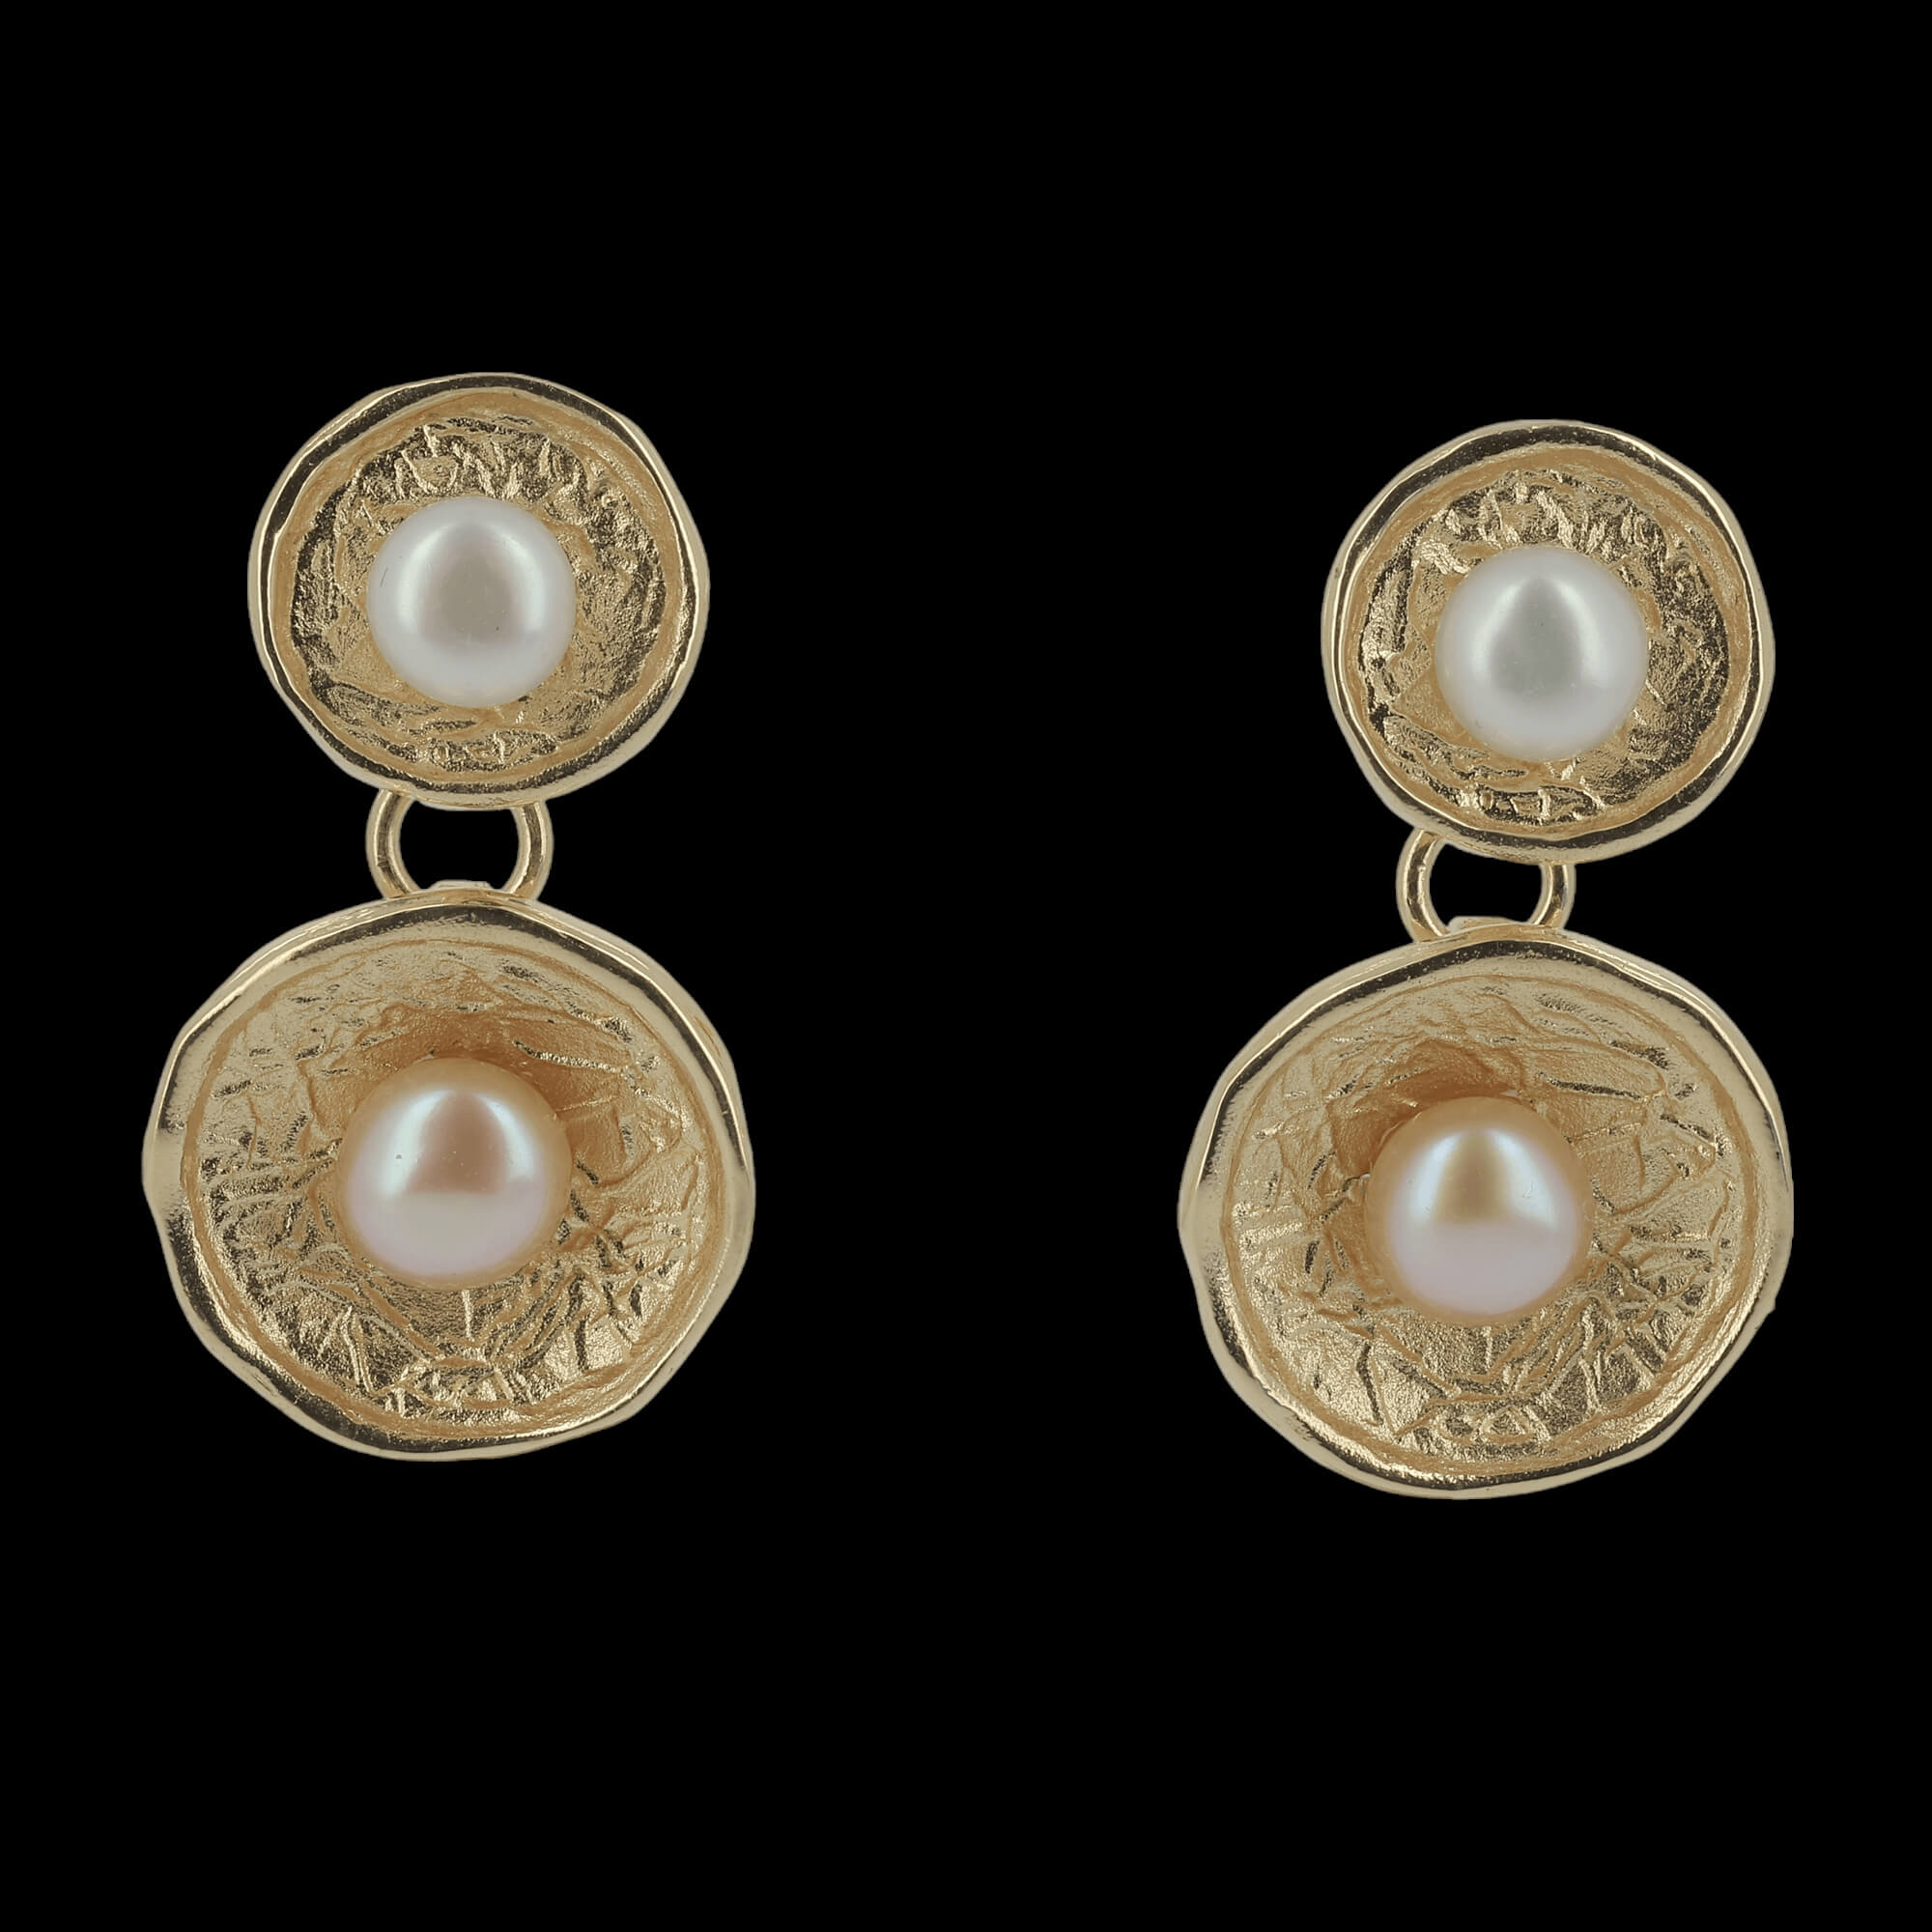 Short -hanging and gilded earrings with two gems